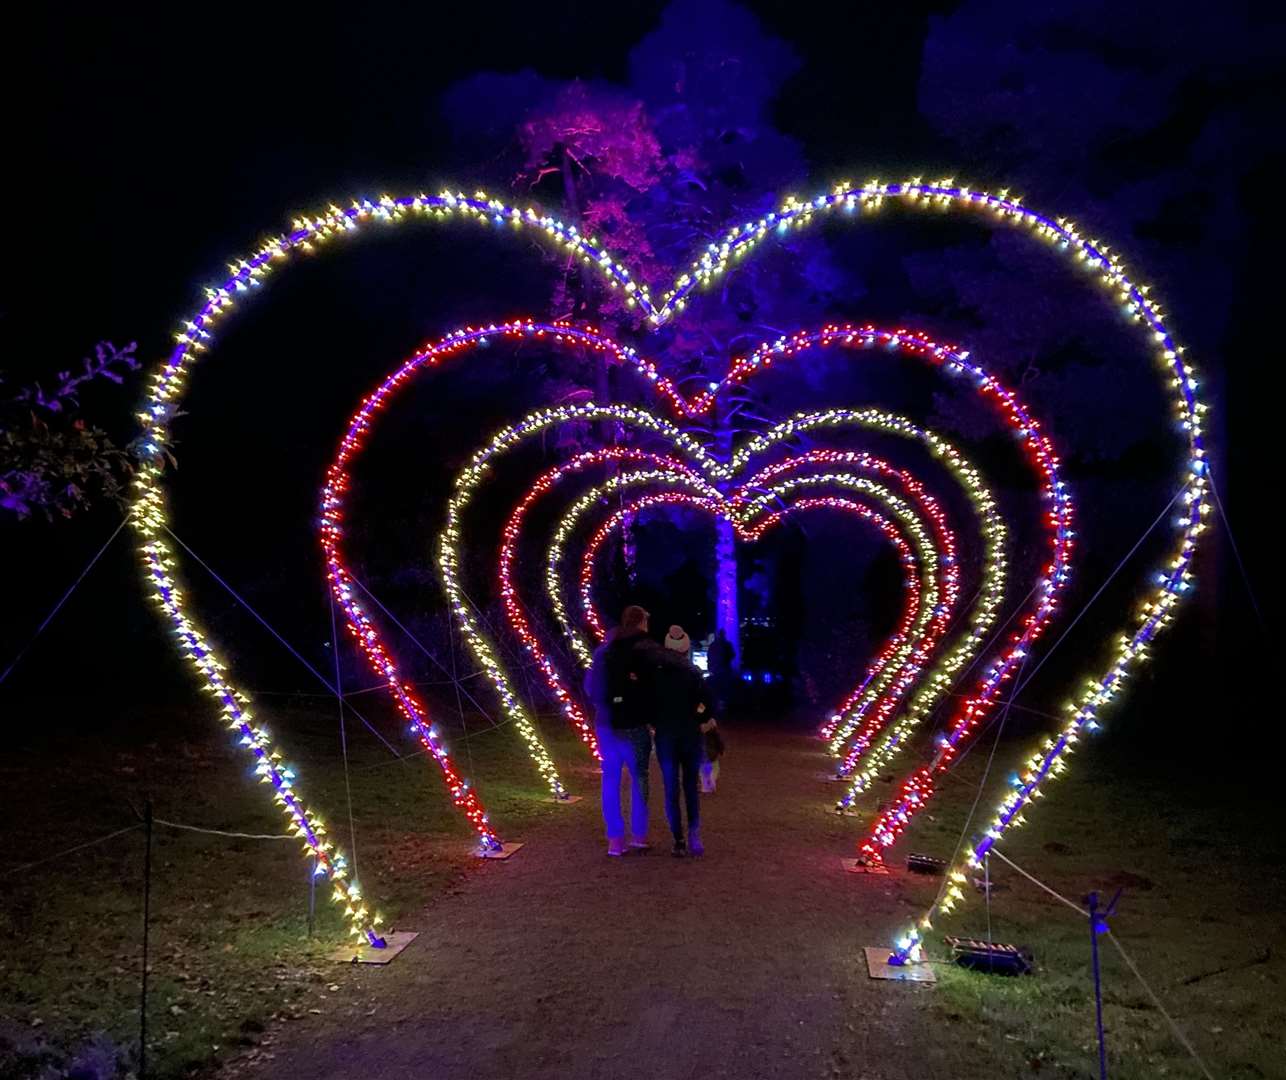 New this year is the illuminated heart arch